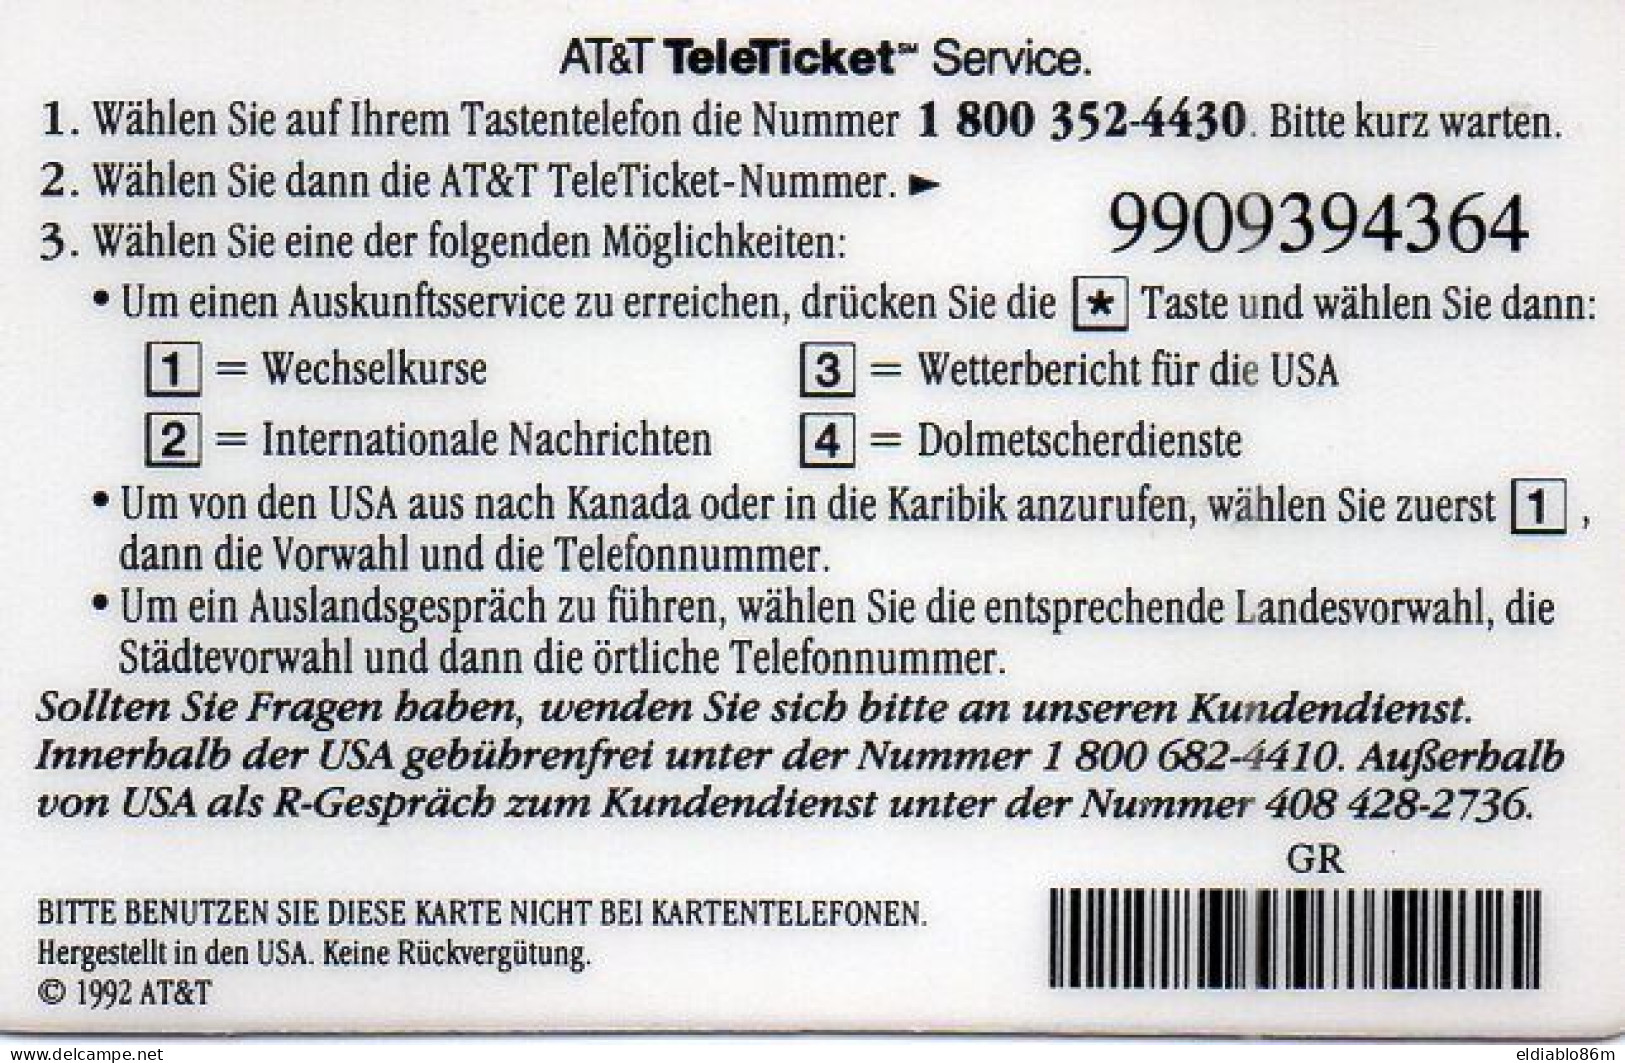 UNITED STATES - PREPAID - AT&T - TELETICKET - AMERICAN BALD EAGLE - GROUP 3 - GERMAN - AT&T